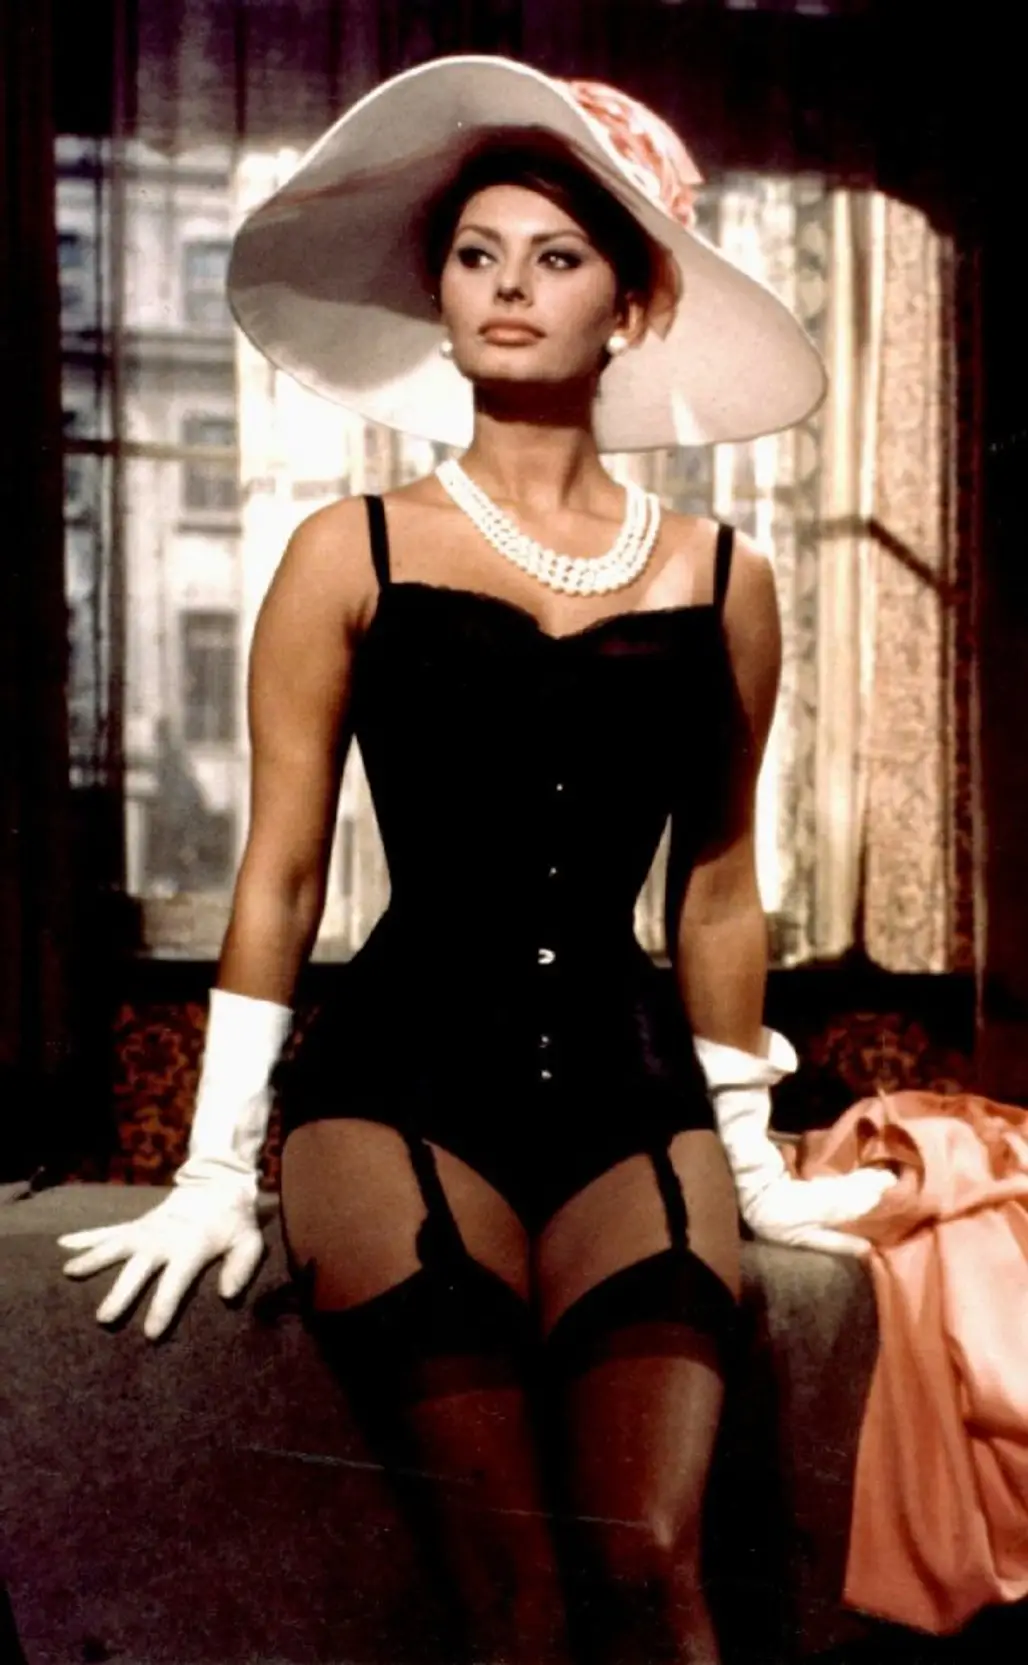 Timeless but with Sexy Lingerie? All Hail Sophia Loren